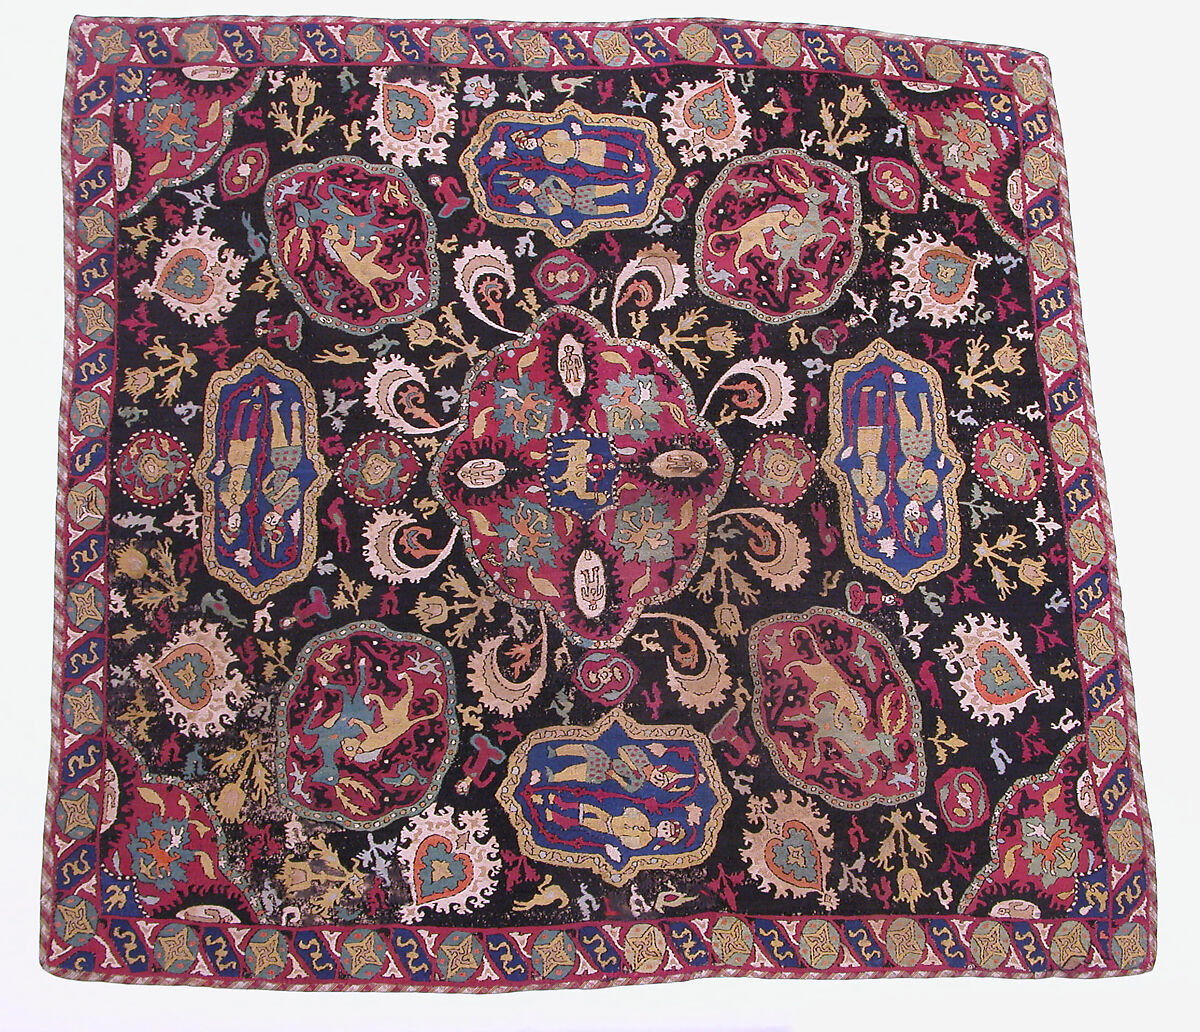 Cover, Cotton, silk; plain weave, embroidered 